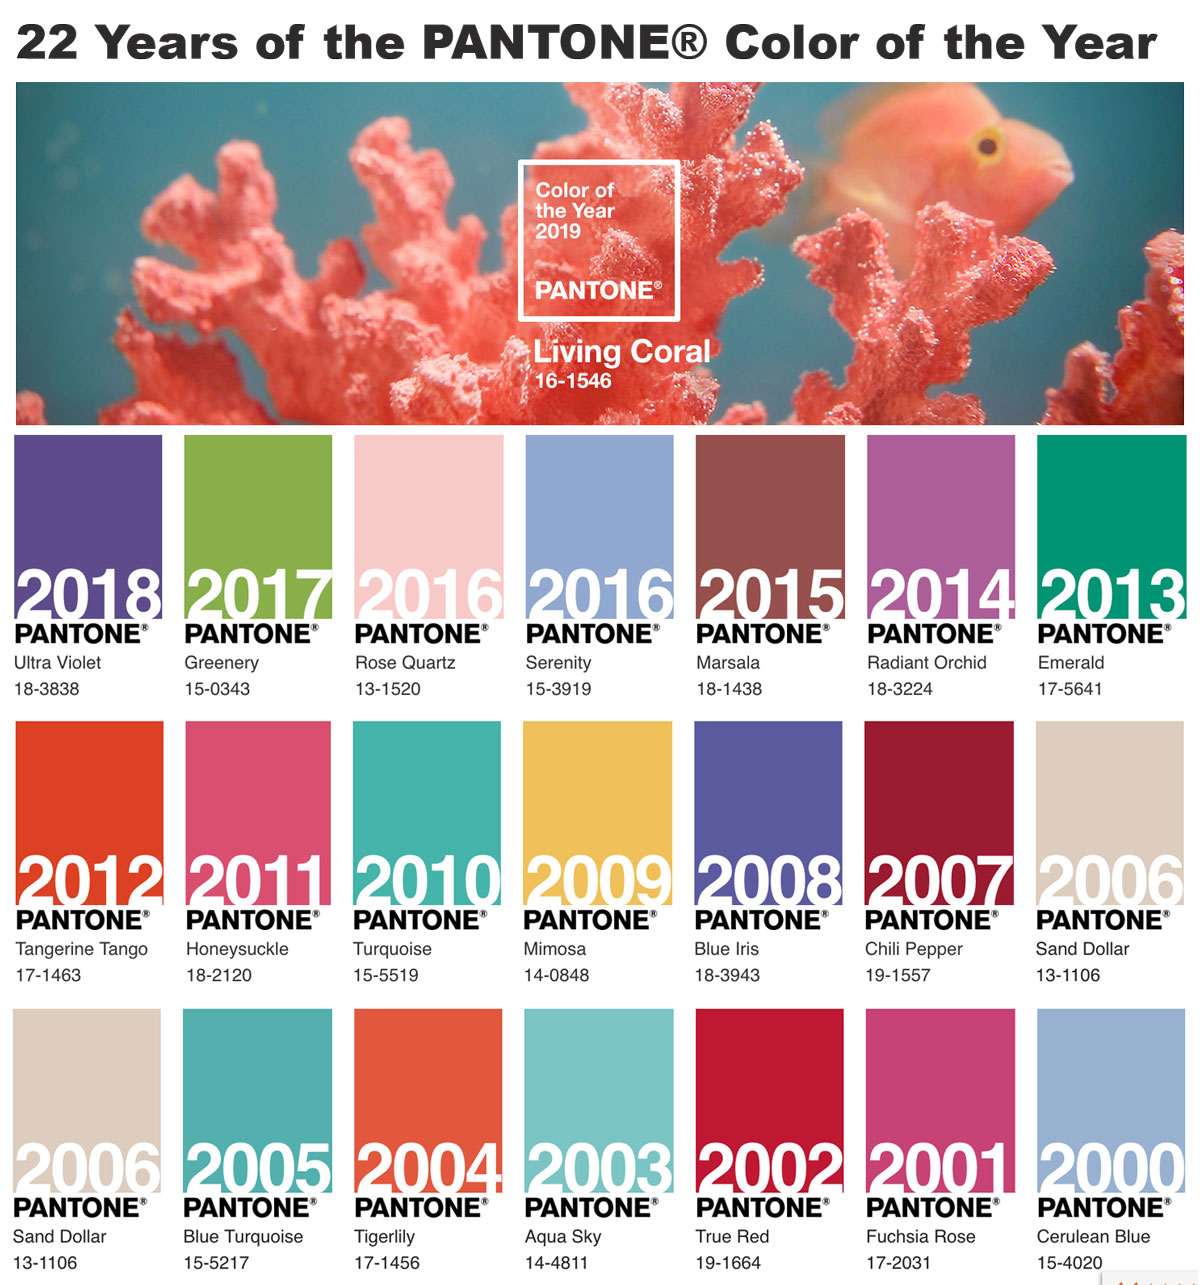 Drumroll, Please! PANTONE’S Color of 2019 is Living Coral - Park City